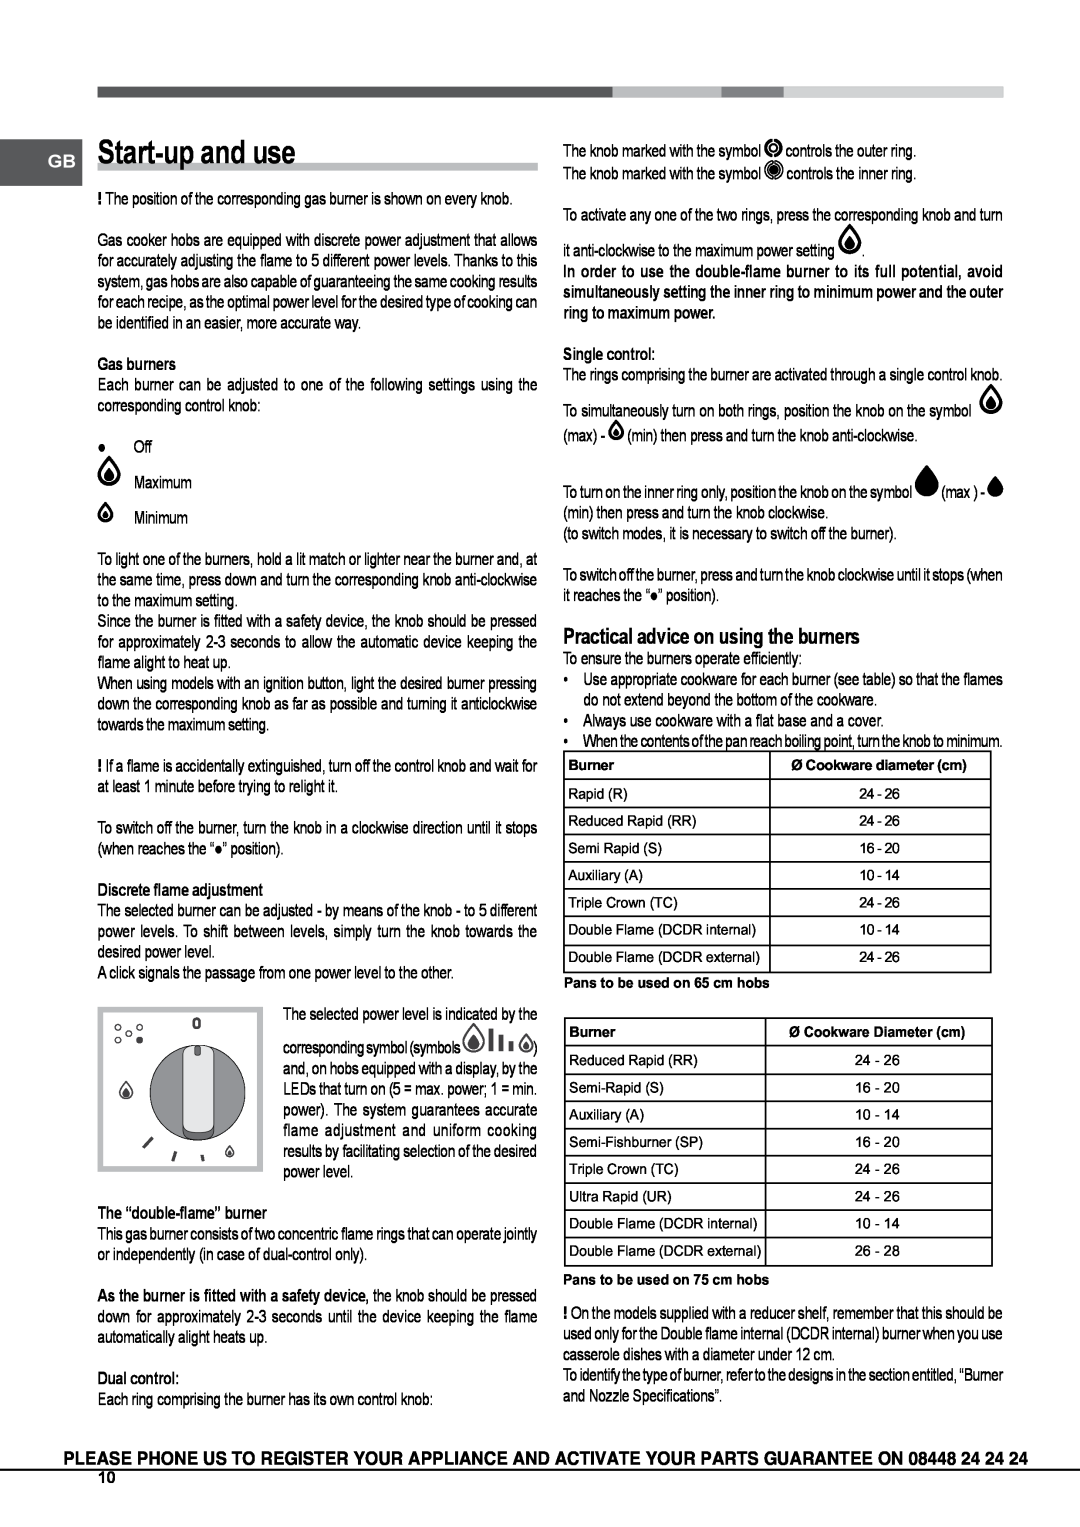 Hotpoint GA630RTX manual GB Start-up and use, Practical advice on using the burners, Gas burners, Discrete flame adjustment 